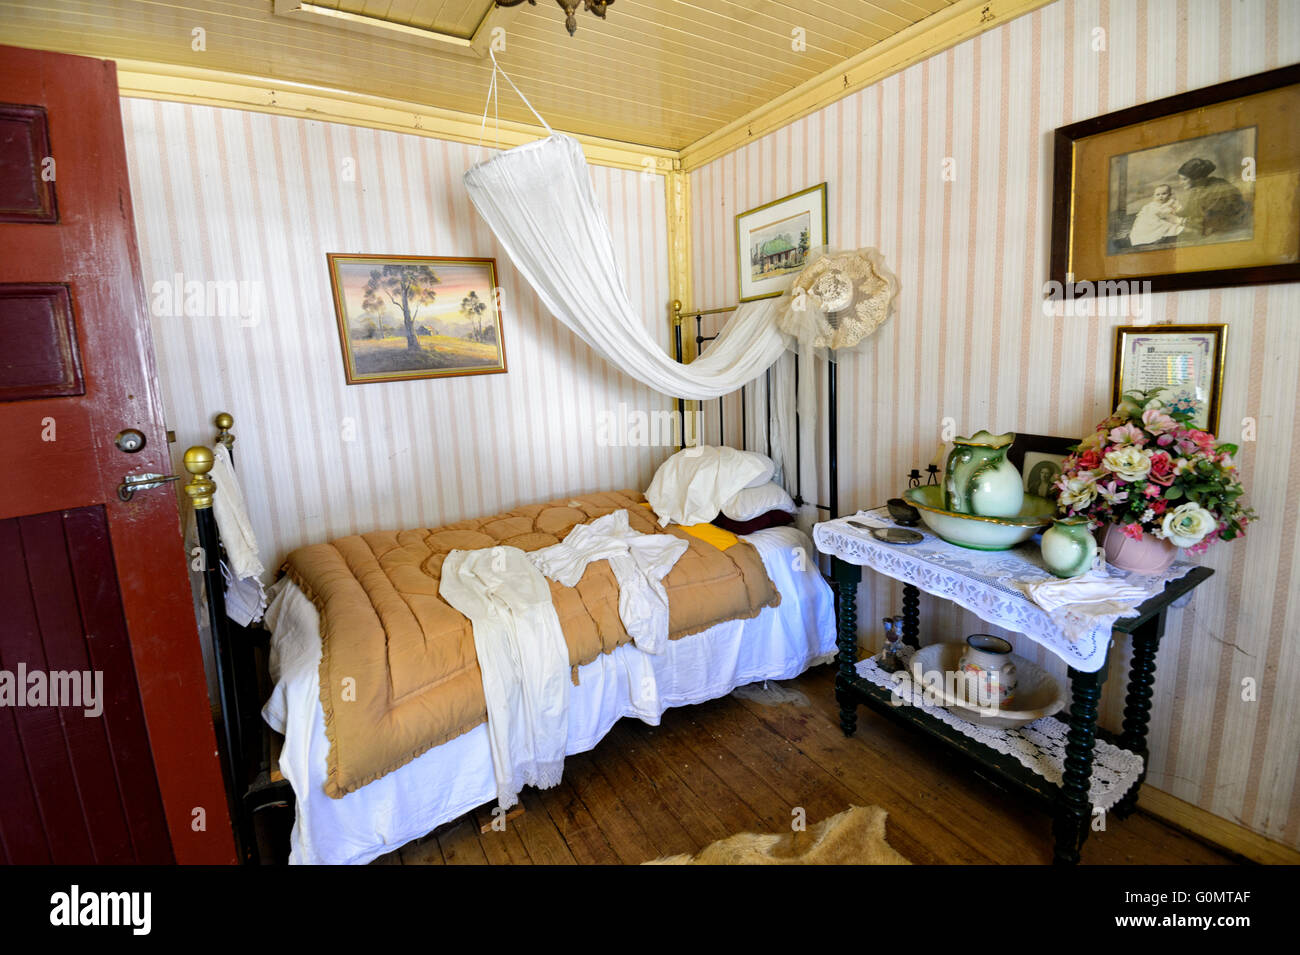 Bedroom from the colonial era, Australiana Pioneer Village, Wilberforce, New South Wales, Australia Stock Photo